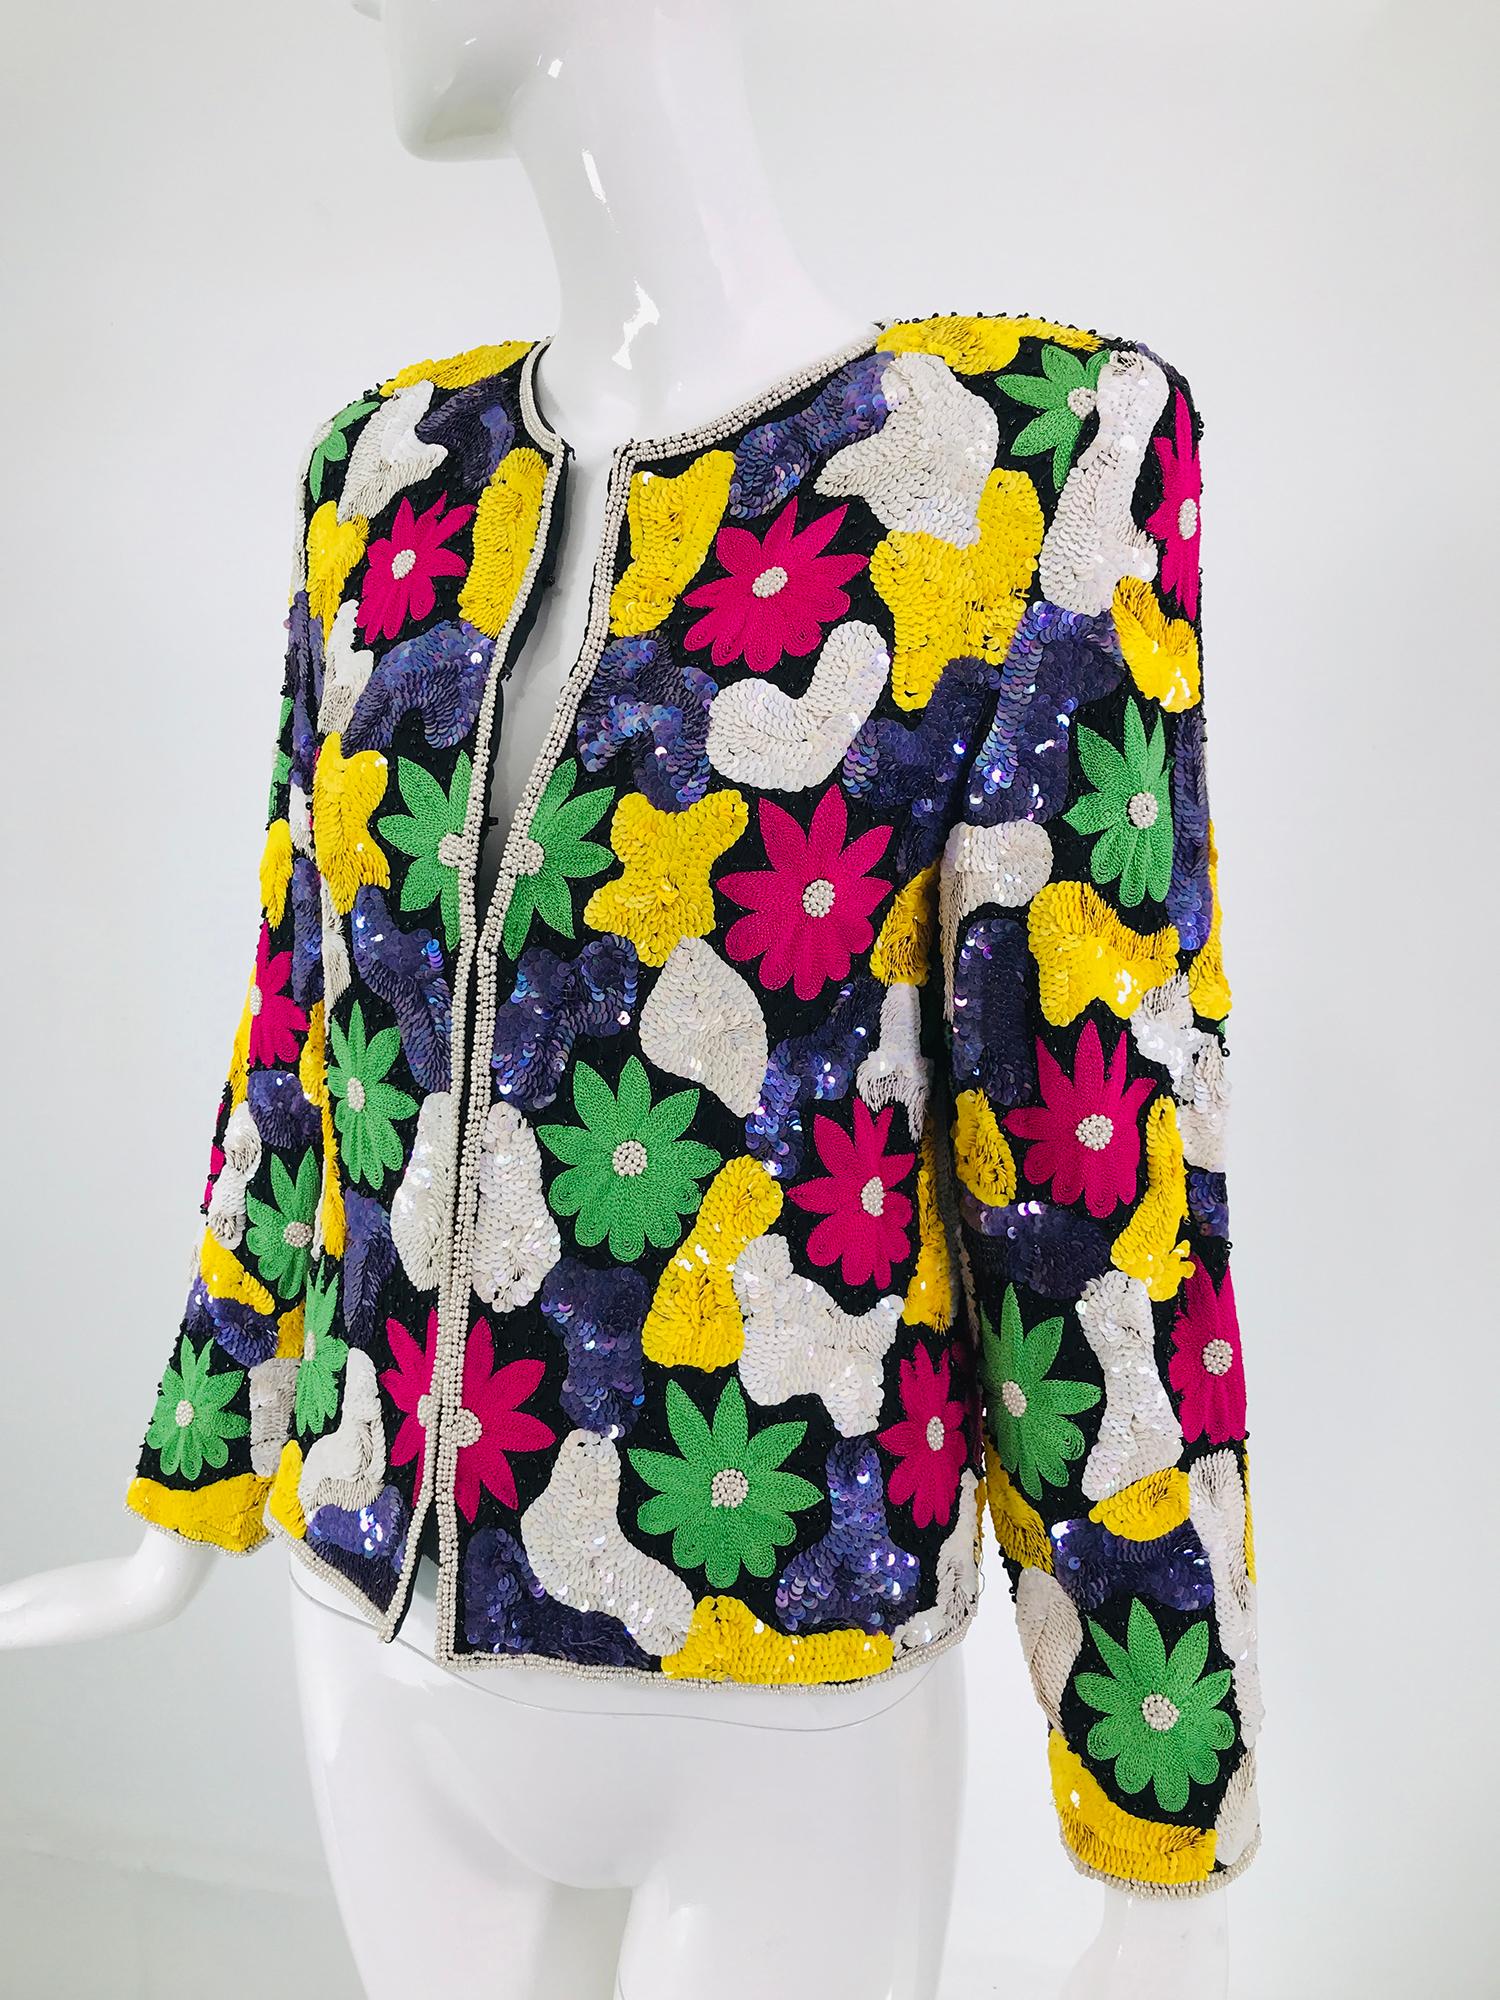 Amazing & vibrant floral sequin silk jacket from the late 1970s. This beautiful jacket is encrusted in sequins in bright primary colours, with pearl trim and black beads. Long sleeved jacket with hidden hook & eye closures done on black silk, lined